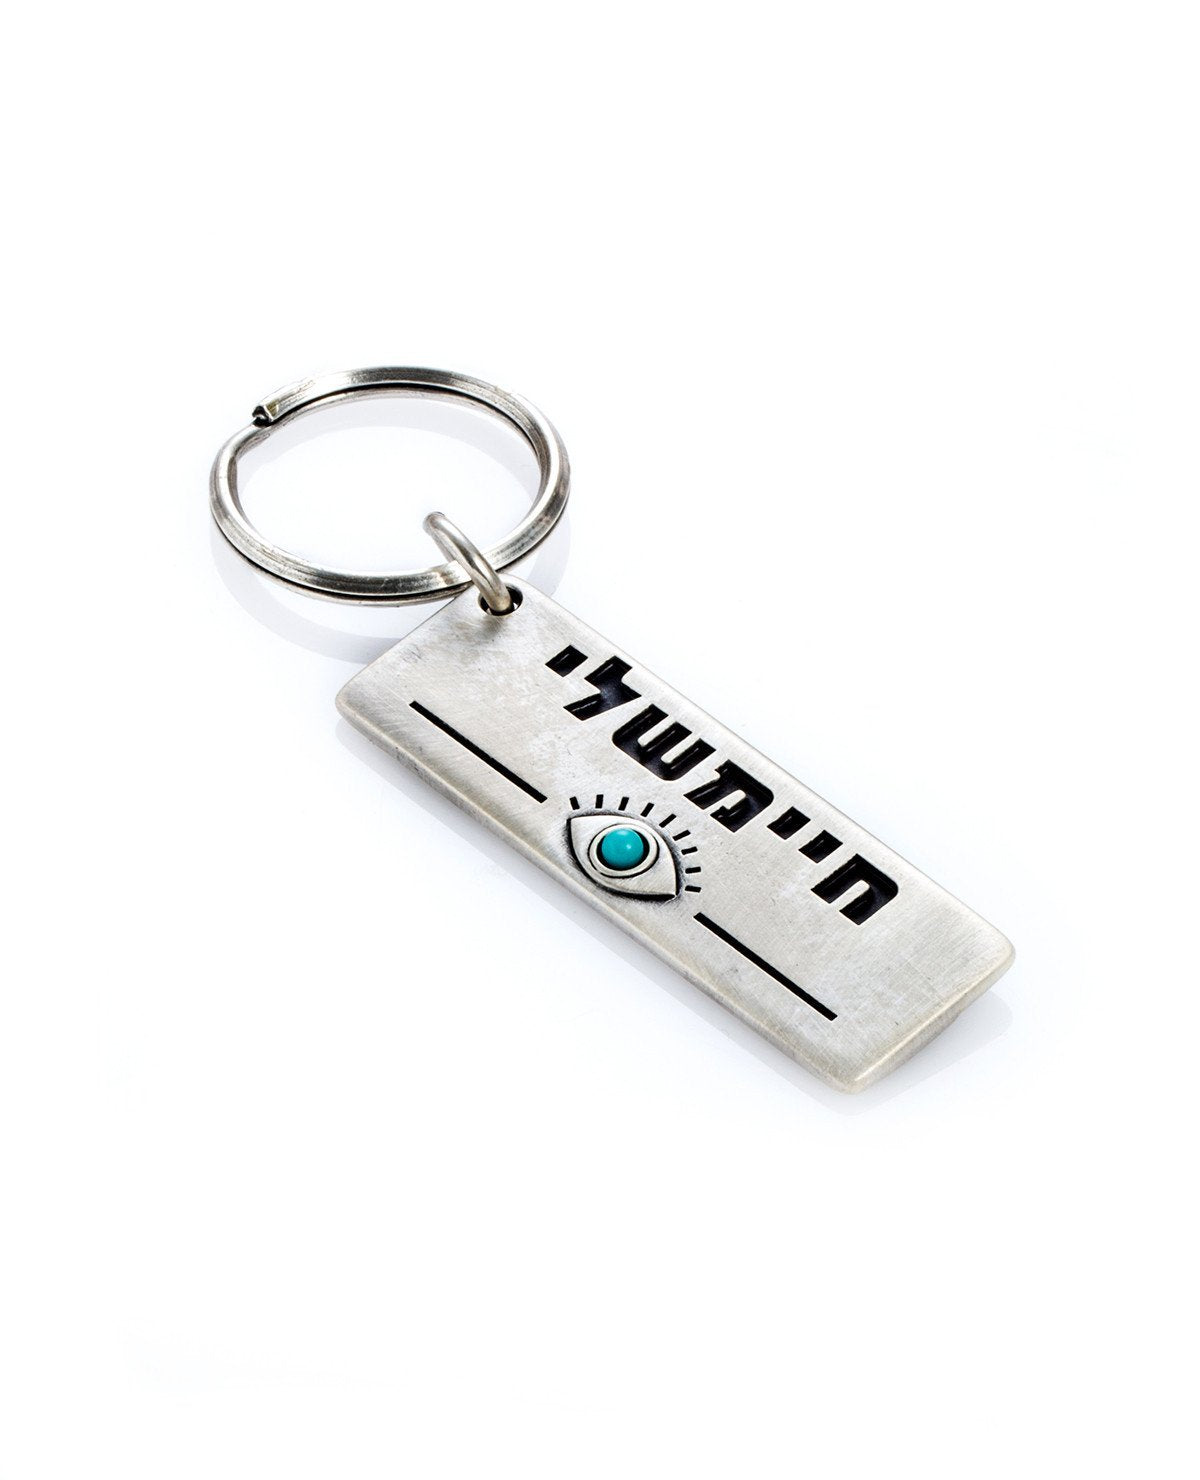 A keychain taken from real life, with a local slang expression of love.
The keychain is designed as a rectangular plate with the words "My Life" written on one side. Beneath is an embossed eye inlaid with a beautiful turquoise stone. Along the other side of the plate is an impressive and artistic graphic decoration. 
The keychain is coated in sterling silver and is strong and reliable.
A gift that is fun to give, along with a big hug, to anyone we want to make sure they know that they are our life!
  Length